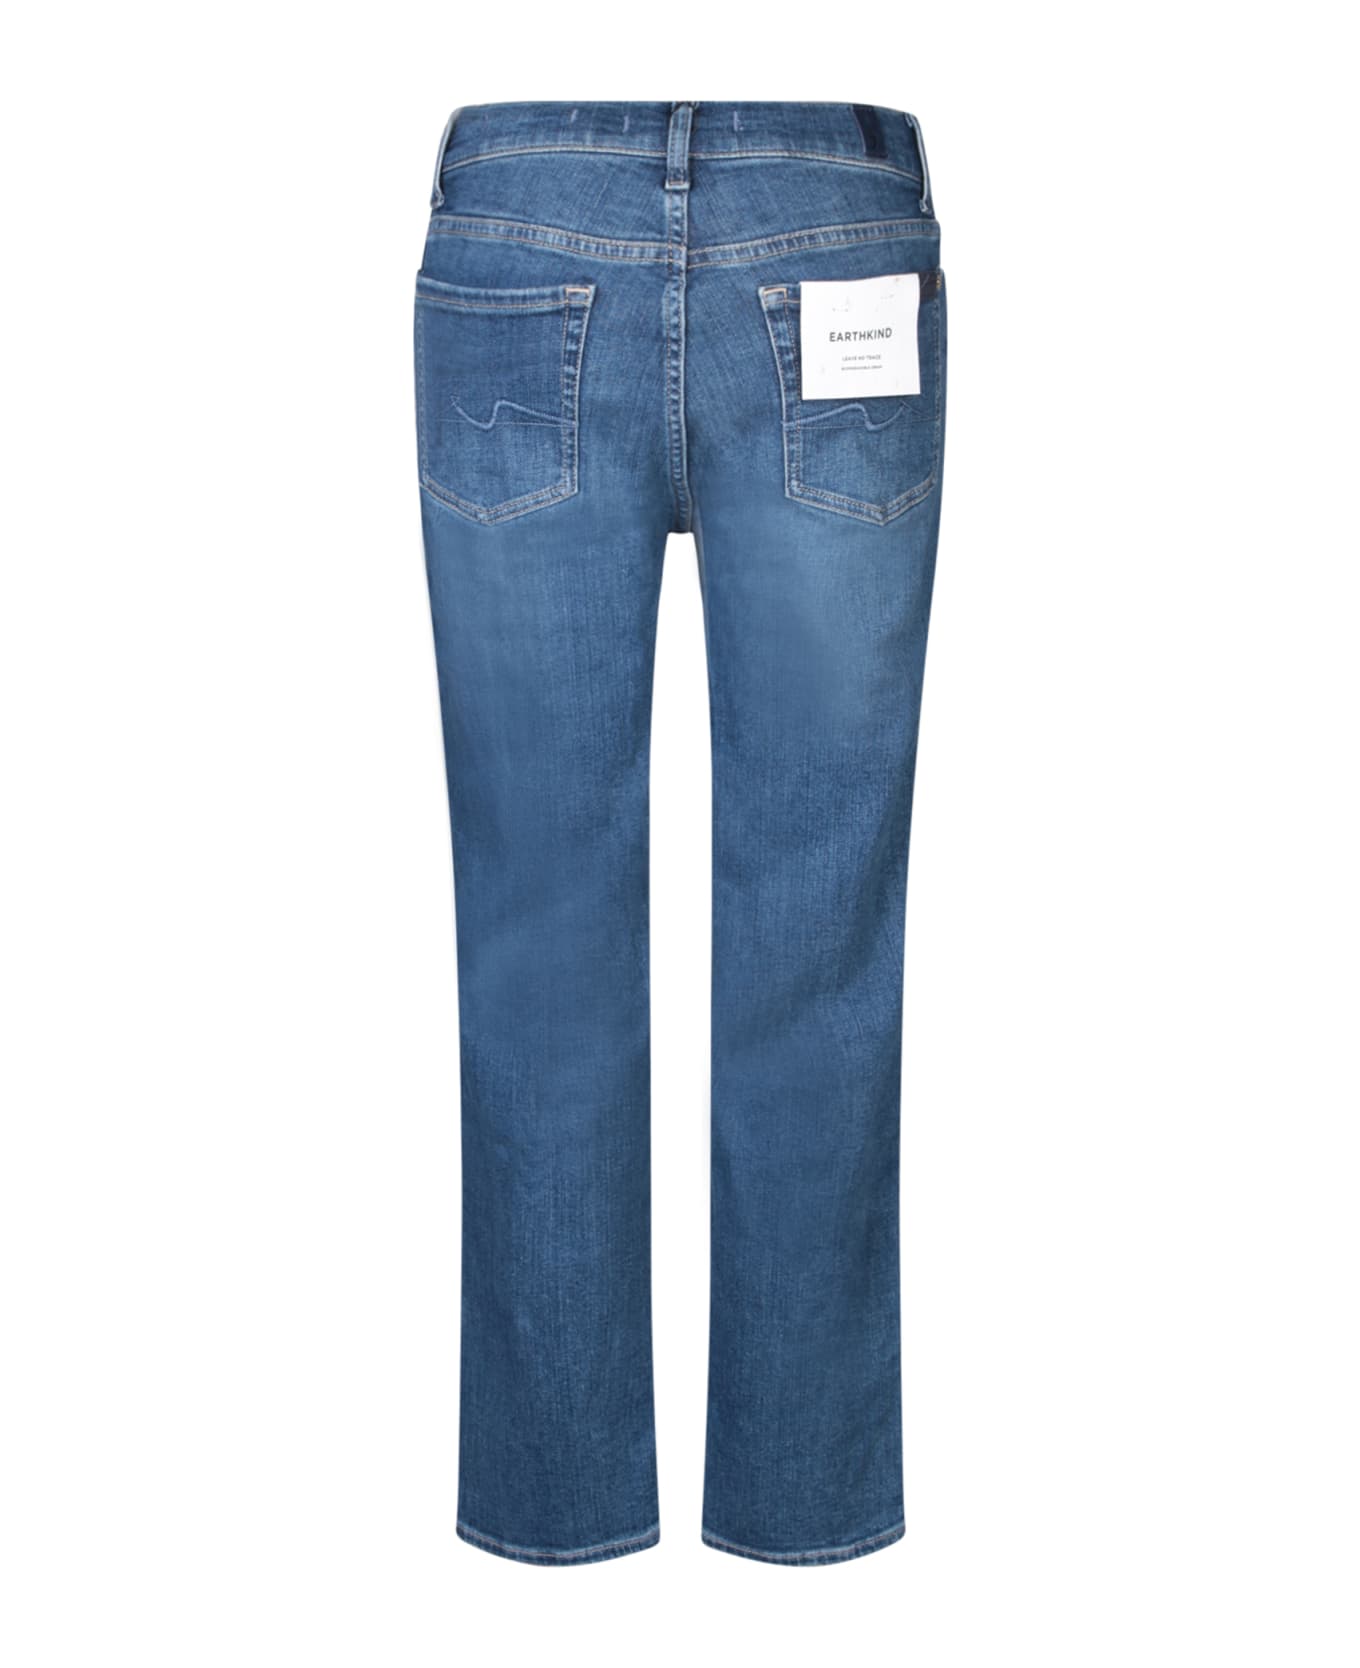 7 For All Mankind Straight Crop Blue Jeans - Blue